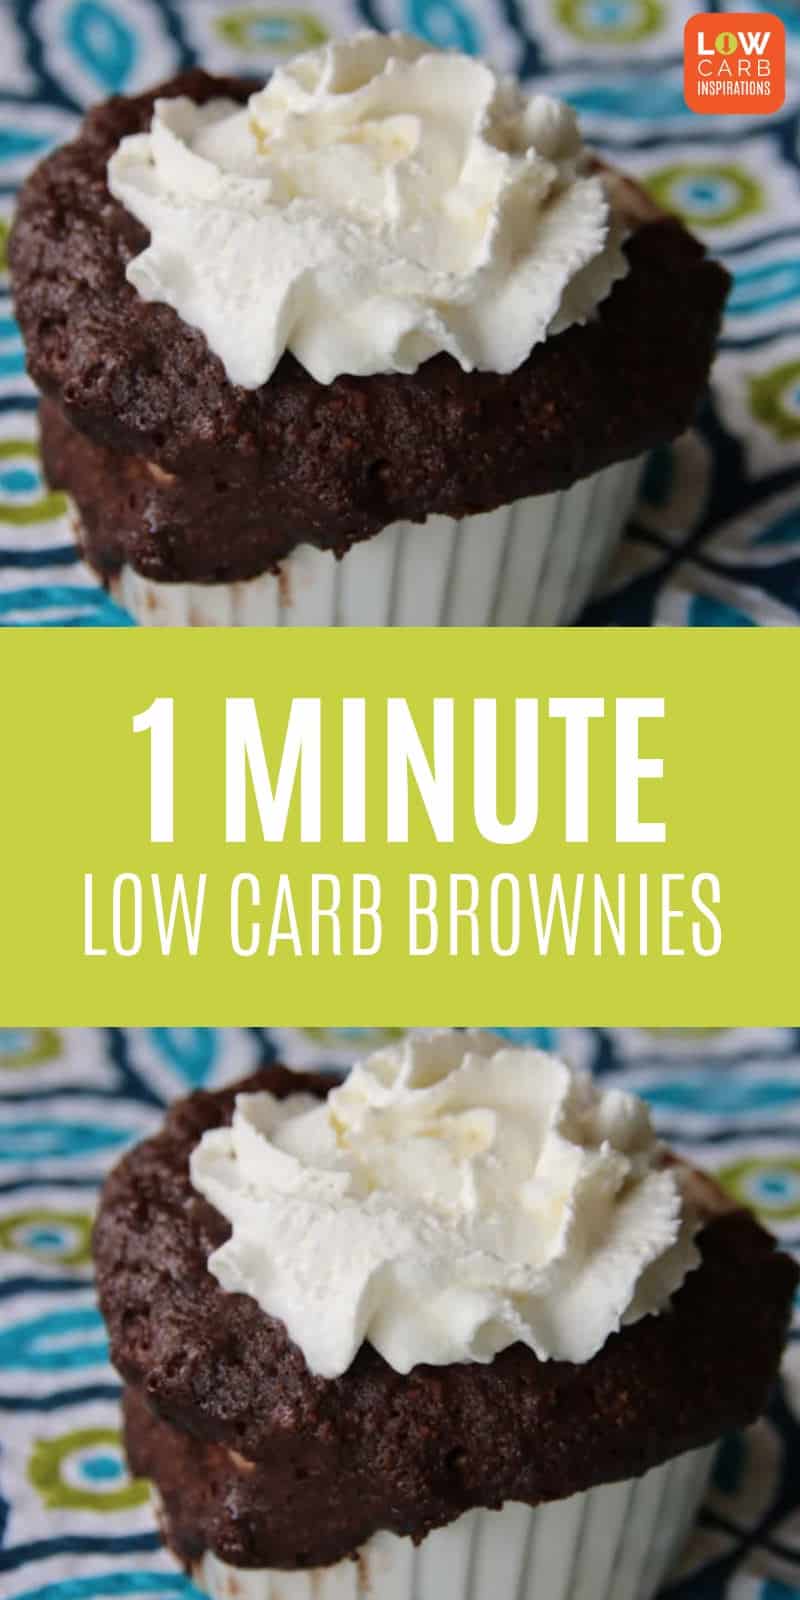 These 1 minute low carb brownies in a mug are amazing! They are the perfect low carb dessert to quickly make for your family!